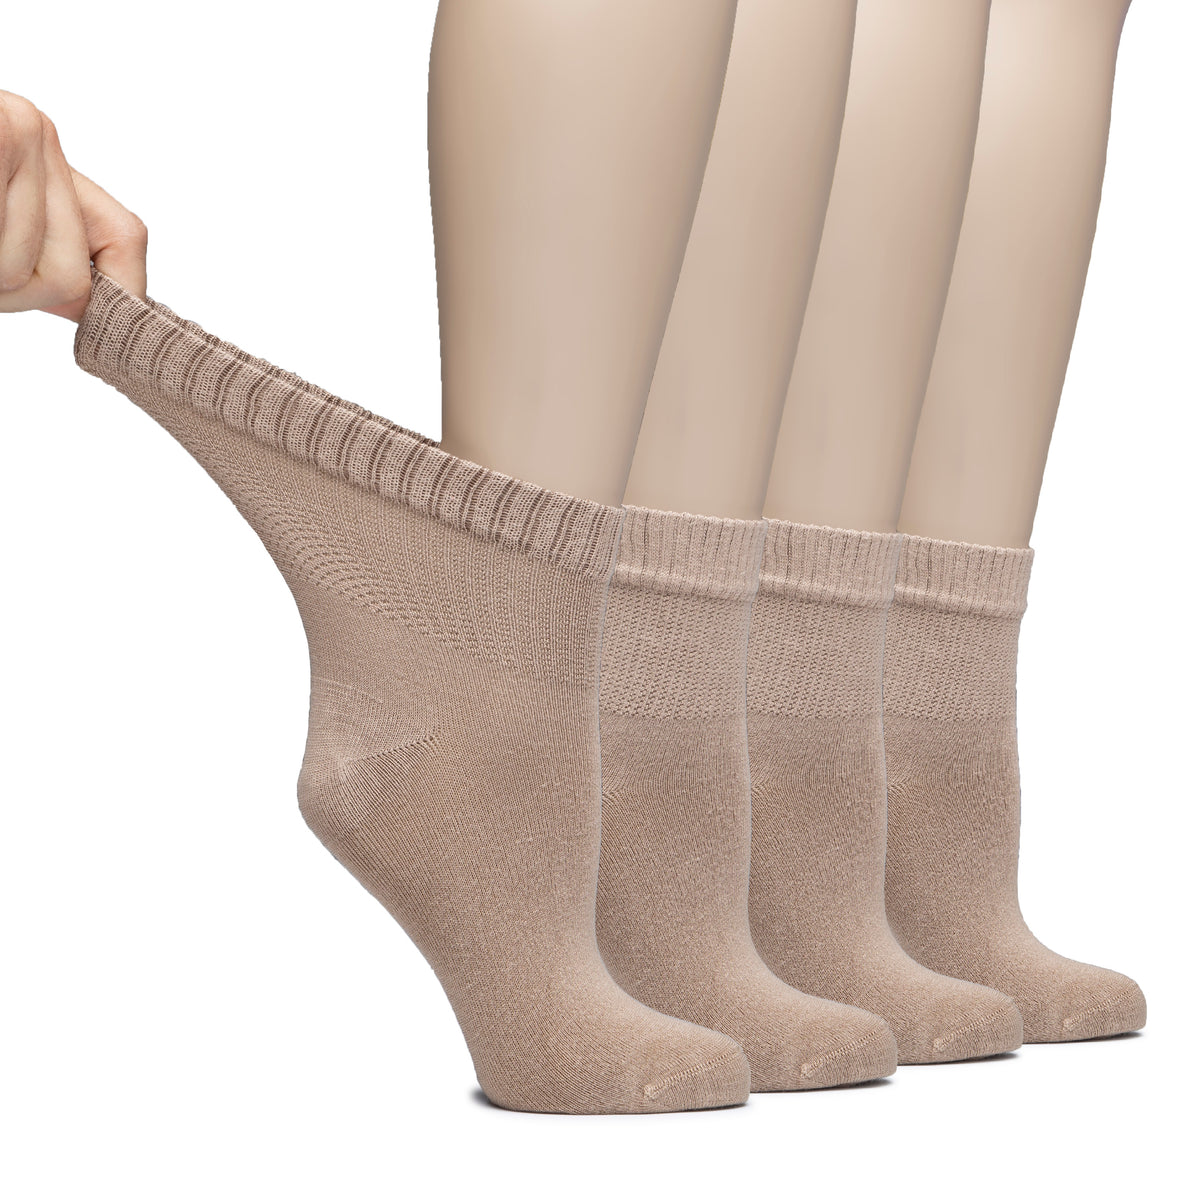 These are Diabetic Bamboo Ankle Socks worn by a woman, featuring a pair of legs covered in tan socks.